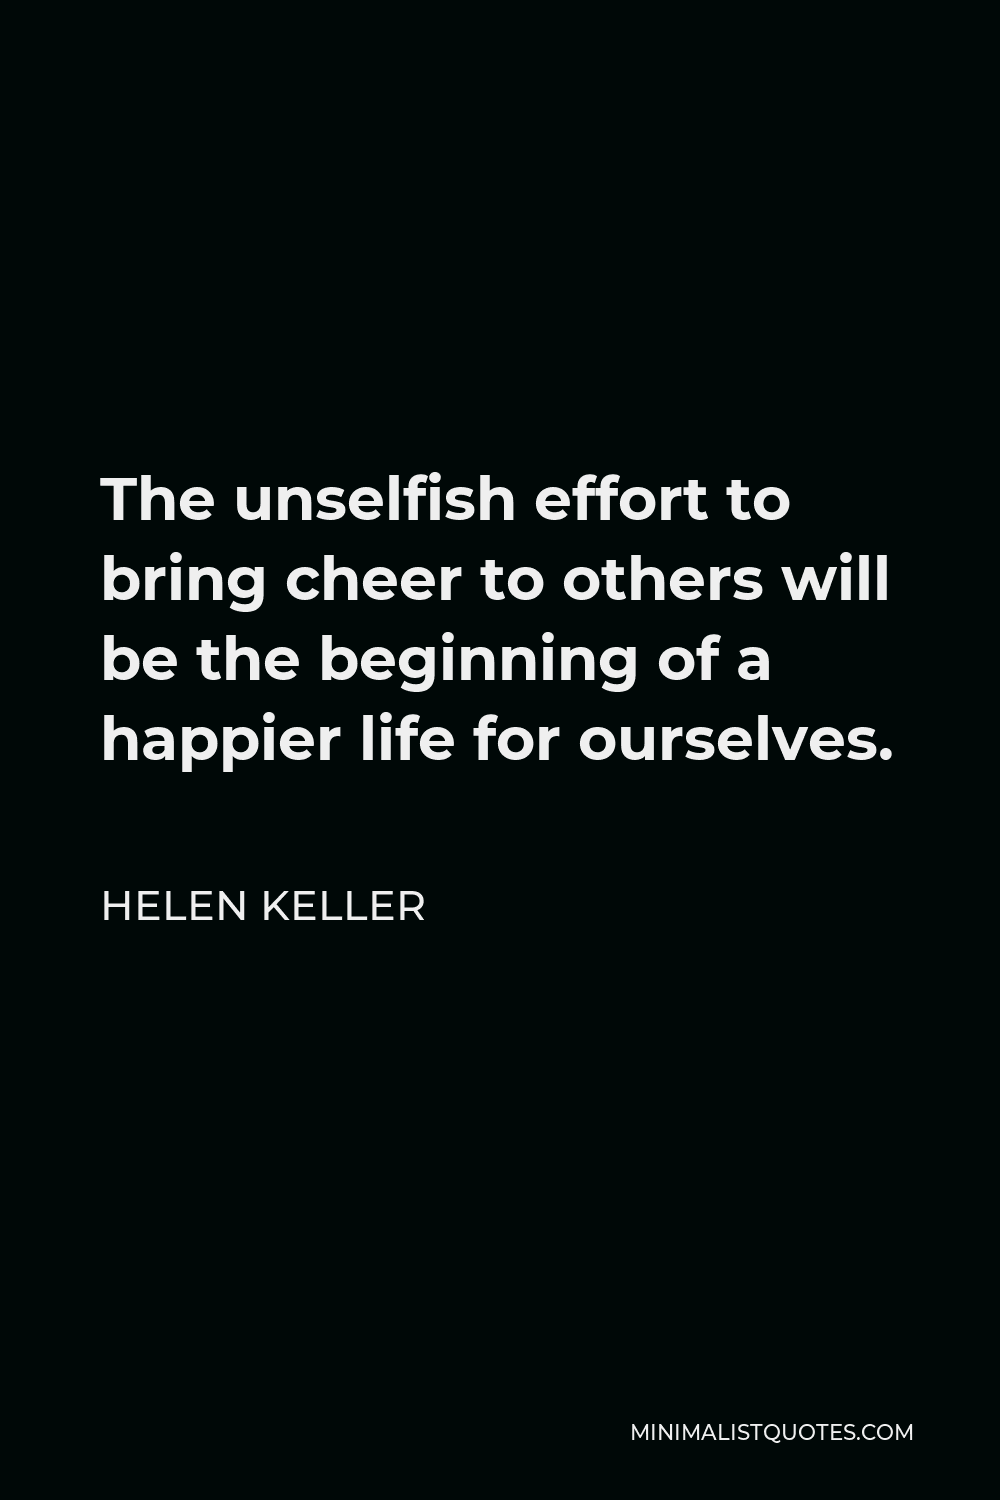 Helen Keller Quote - The unselfish effort to bring cheer to others will be the beginning of a happier life for ourselves.